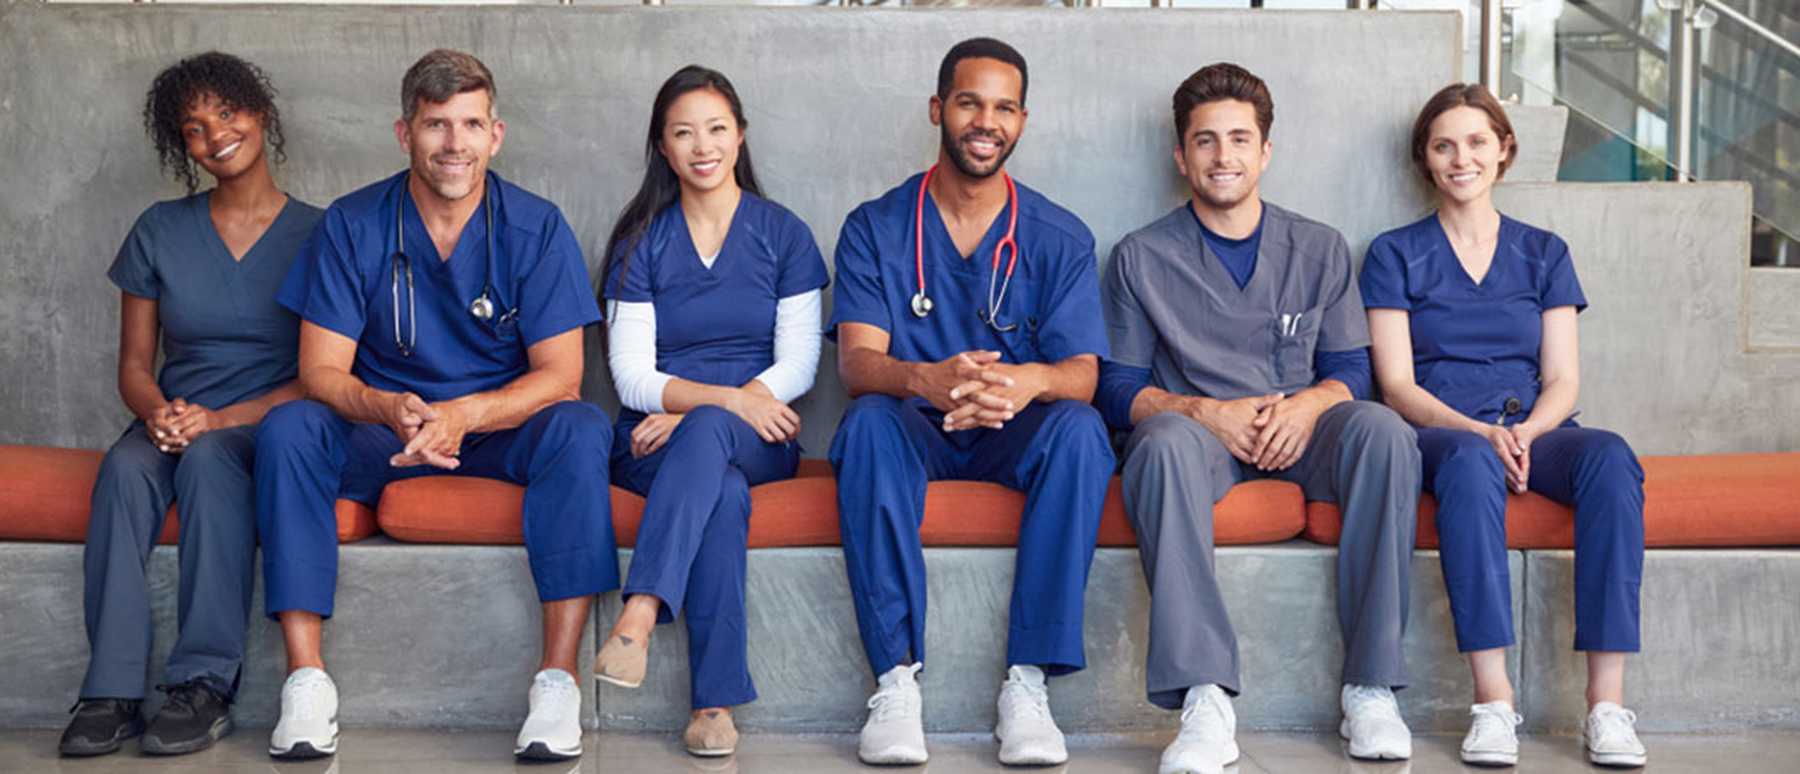 Group of medical providers sitting on a bench